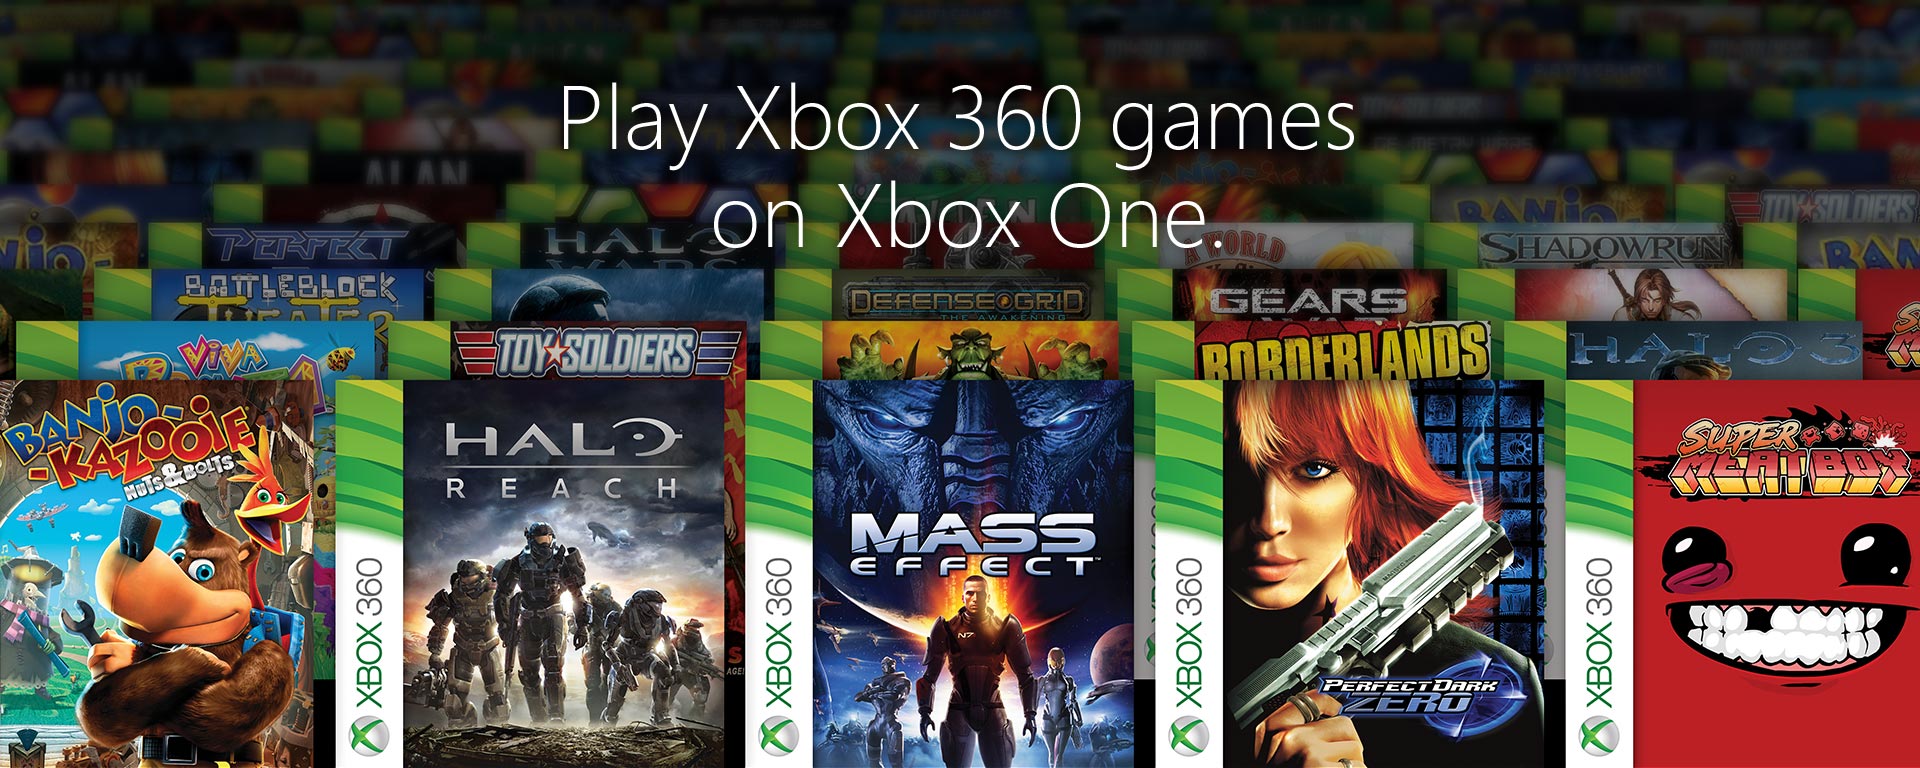 how to access xbox 360 titles on the new xbox one experience with